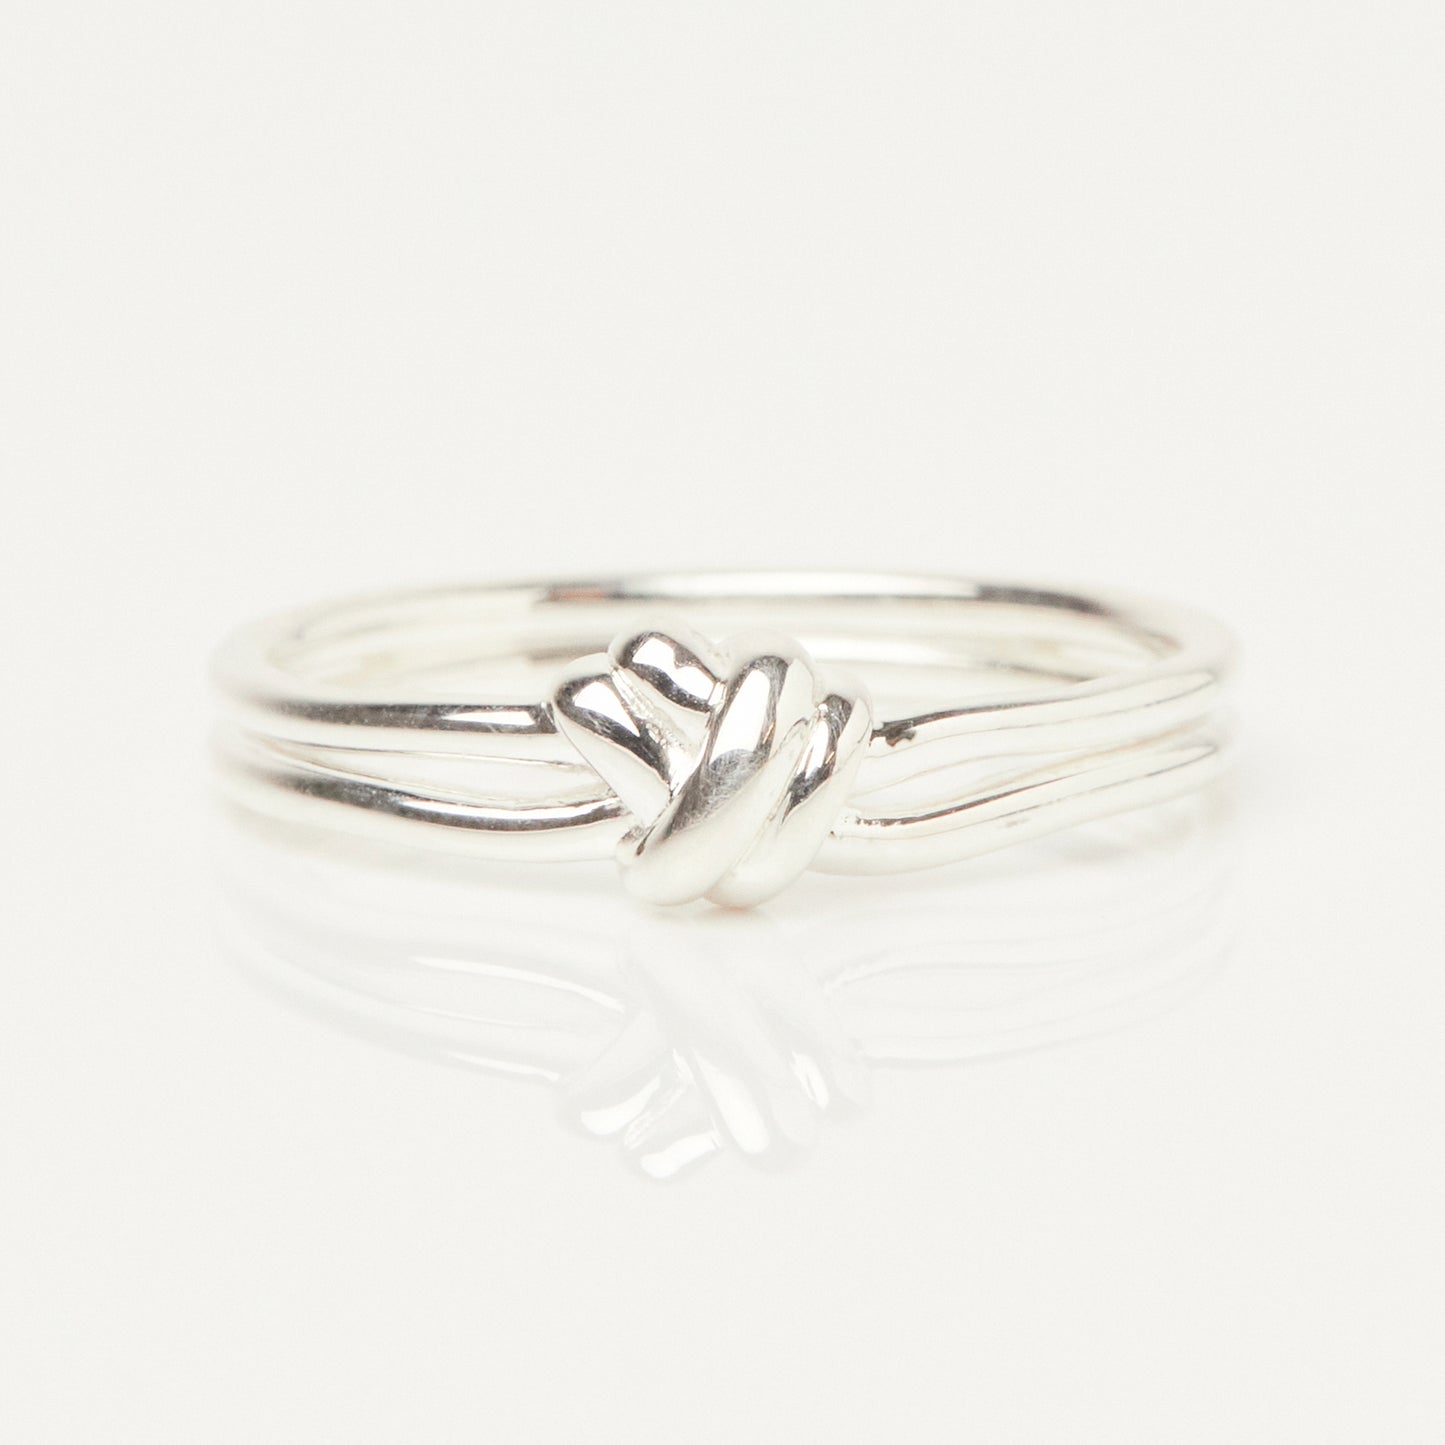 Zoe sugg intentions strength ring in silver